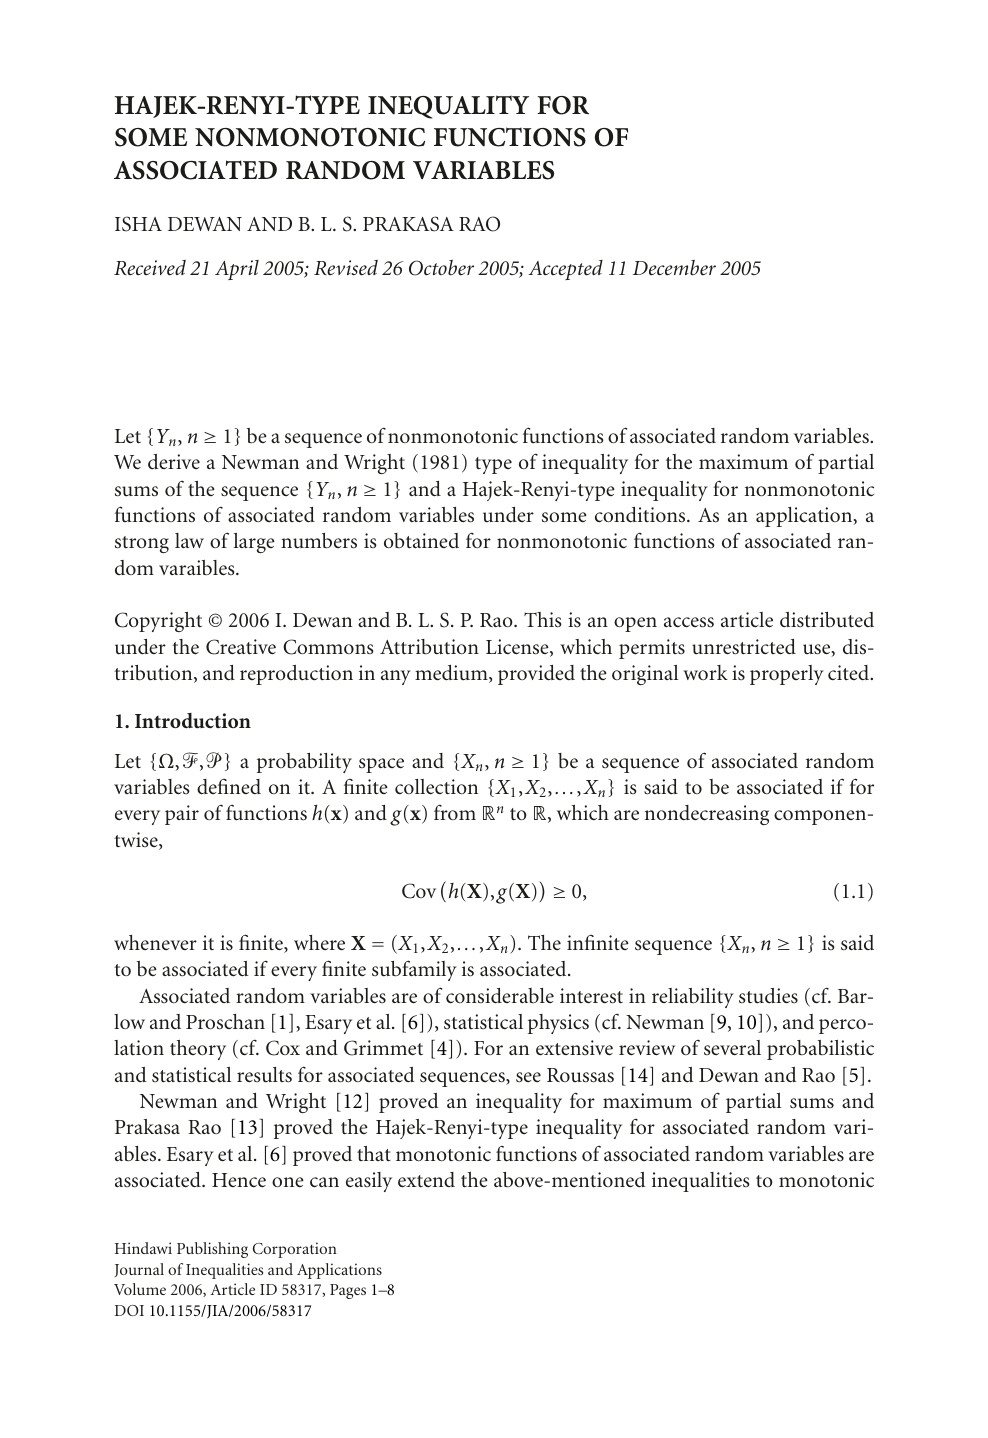 Hajek Renyi Type Inequality For Some Nonmonotonic Functions Of Associated Random Variables Topic Of Research Paper In Mathematics Download Scholarly Article Pdf And Read For Free On Cyberleninka Open Science Hub